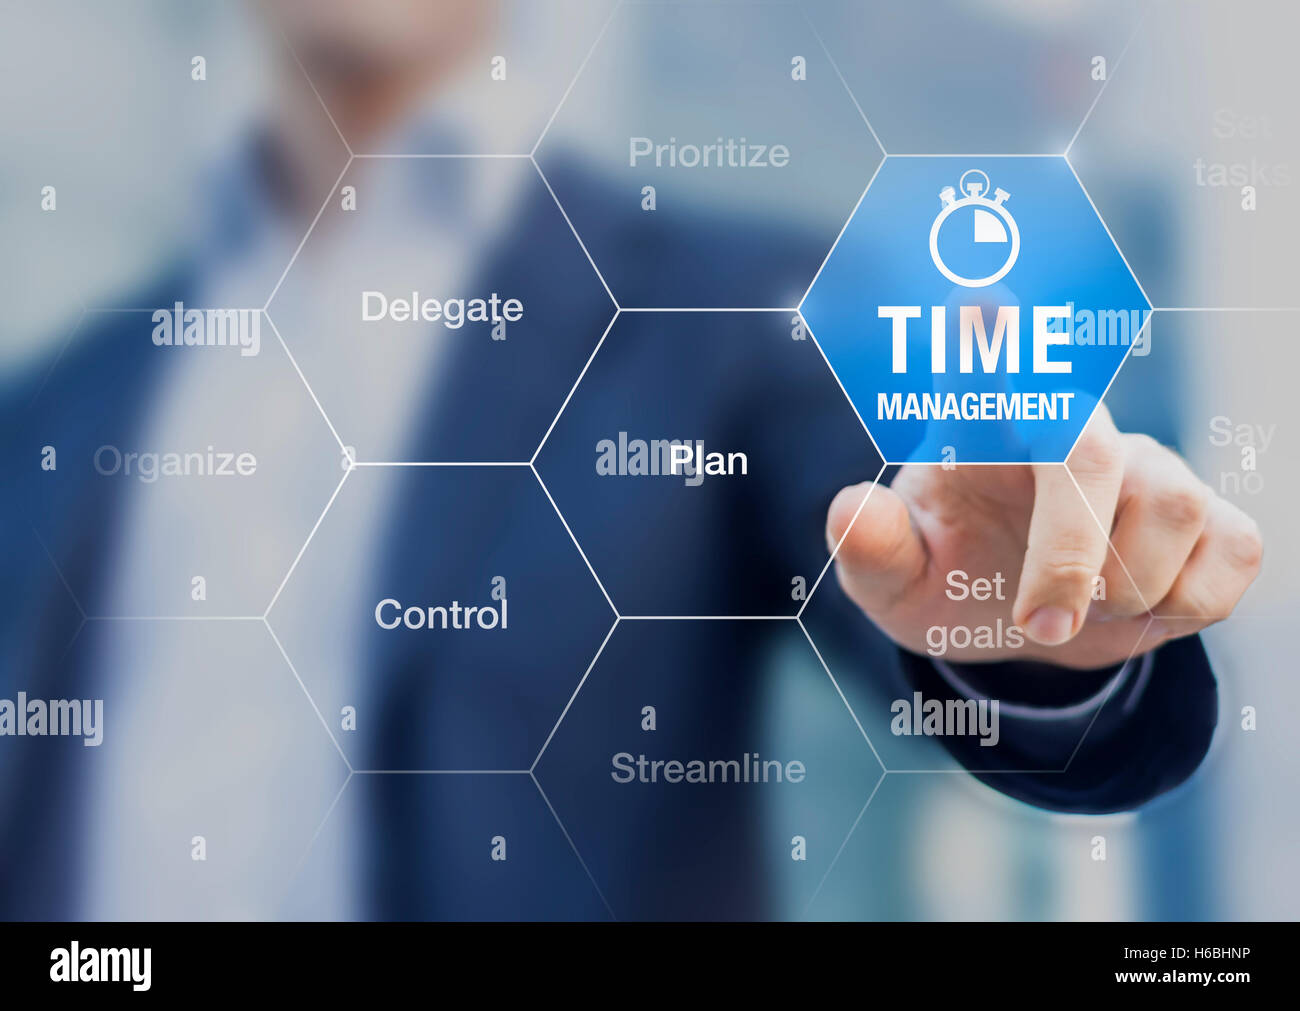 Concept about time management training in business to become successful Stock Photo